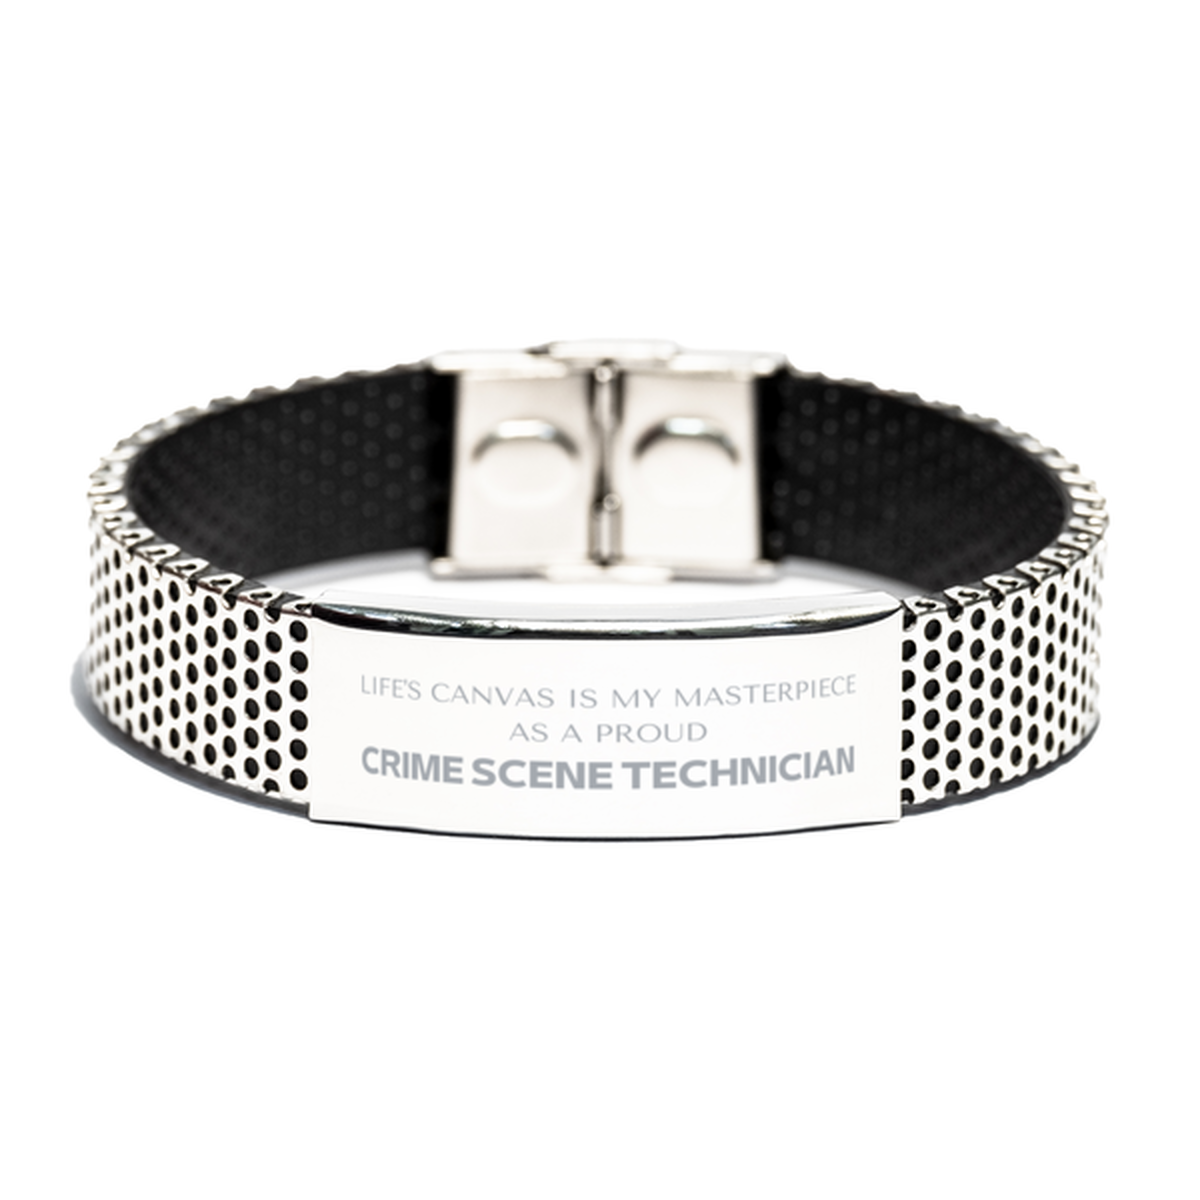 Proud Crime Scene Technician Gifts, Life's canvas is my masterpiece, Epic Birthday Christmas Unique Stainless Steel Bracelet For Crime Scene Technician, Coworkers, Men, Women, Friends